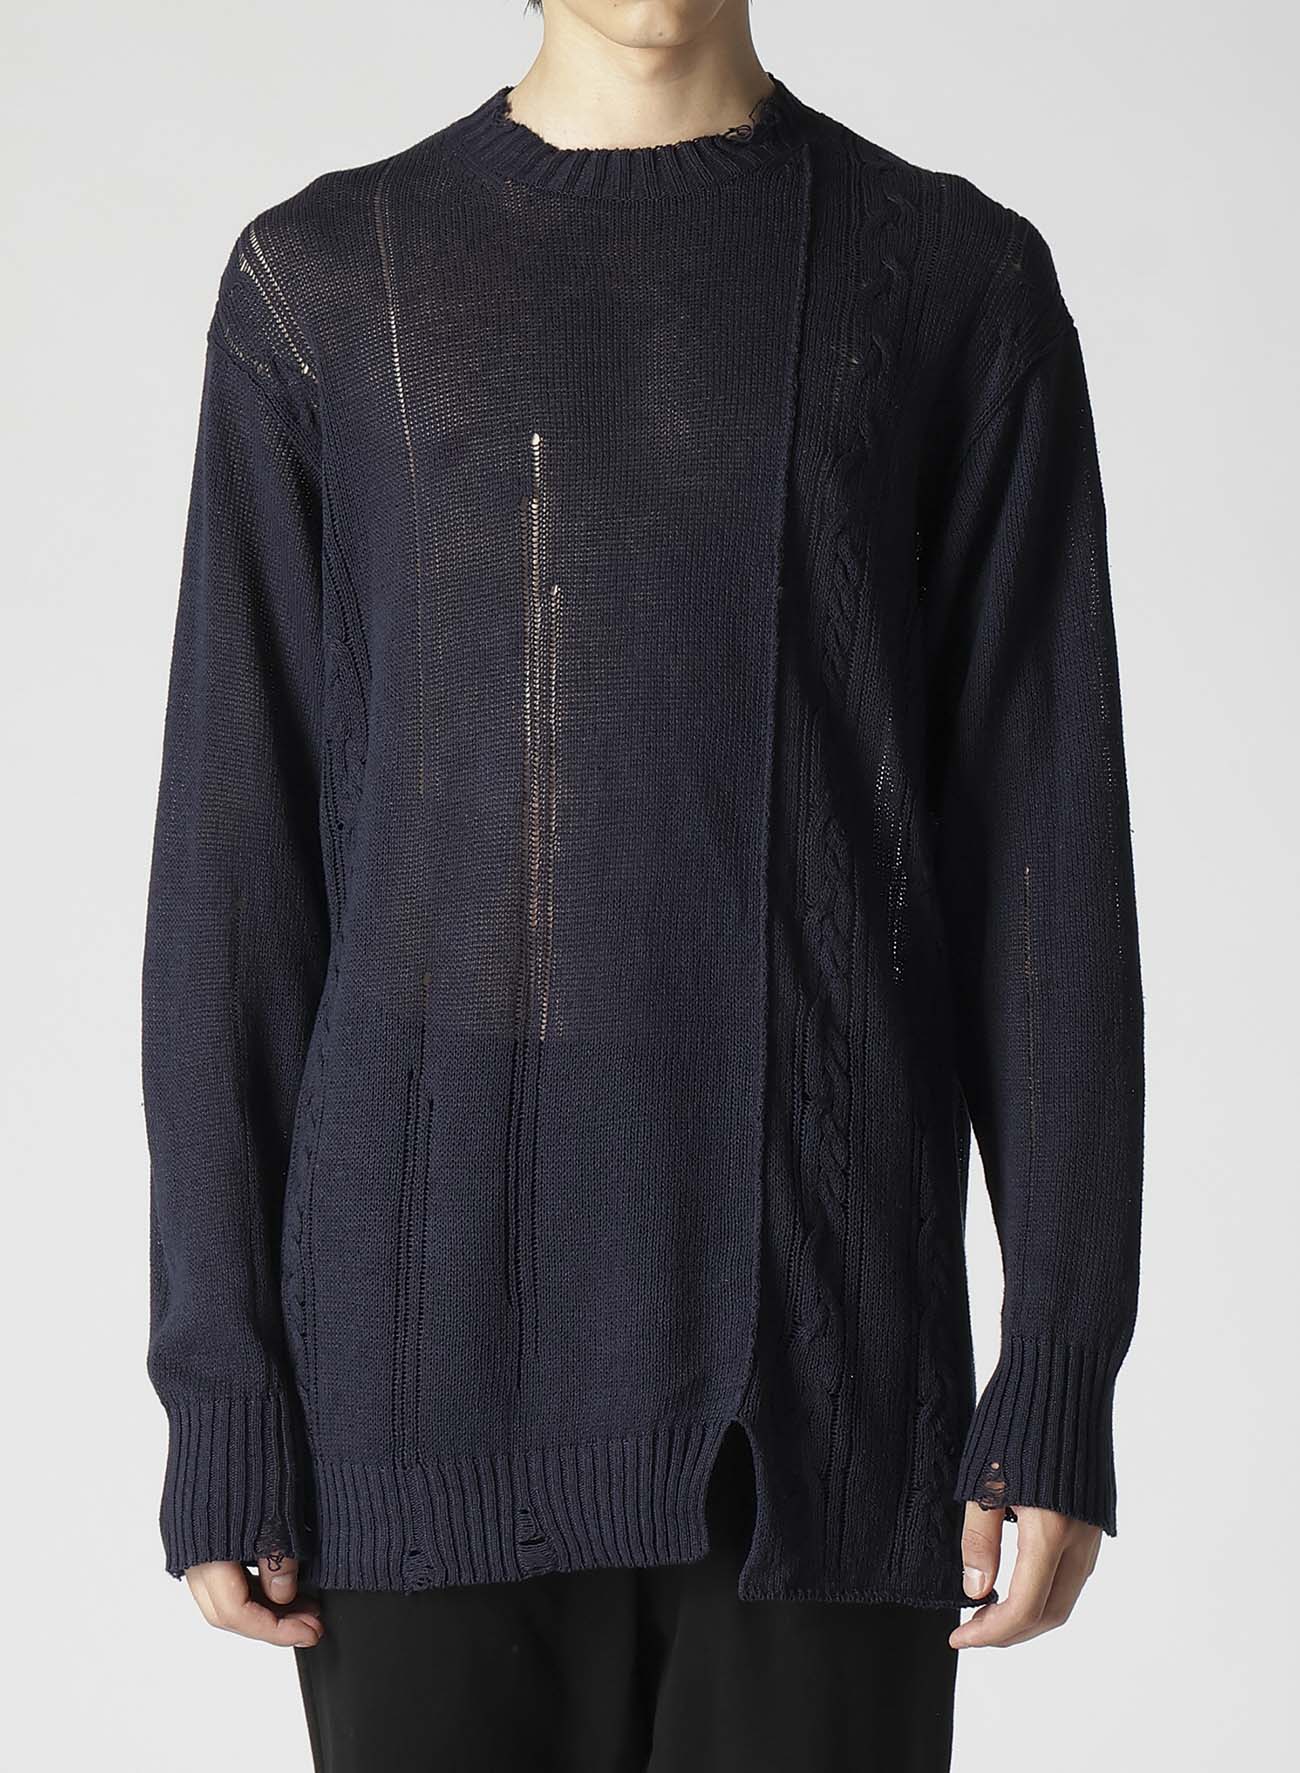 DAMAGE PROCESSED JERSEY CABLE KNITTED PULLOVER